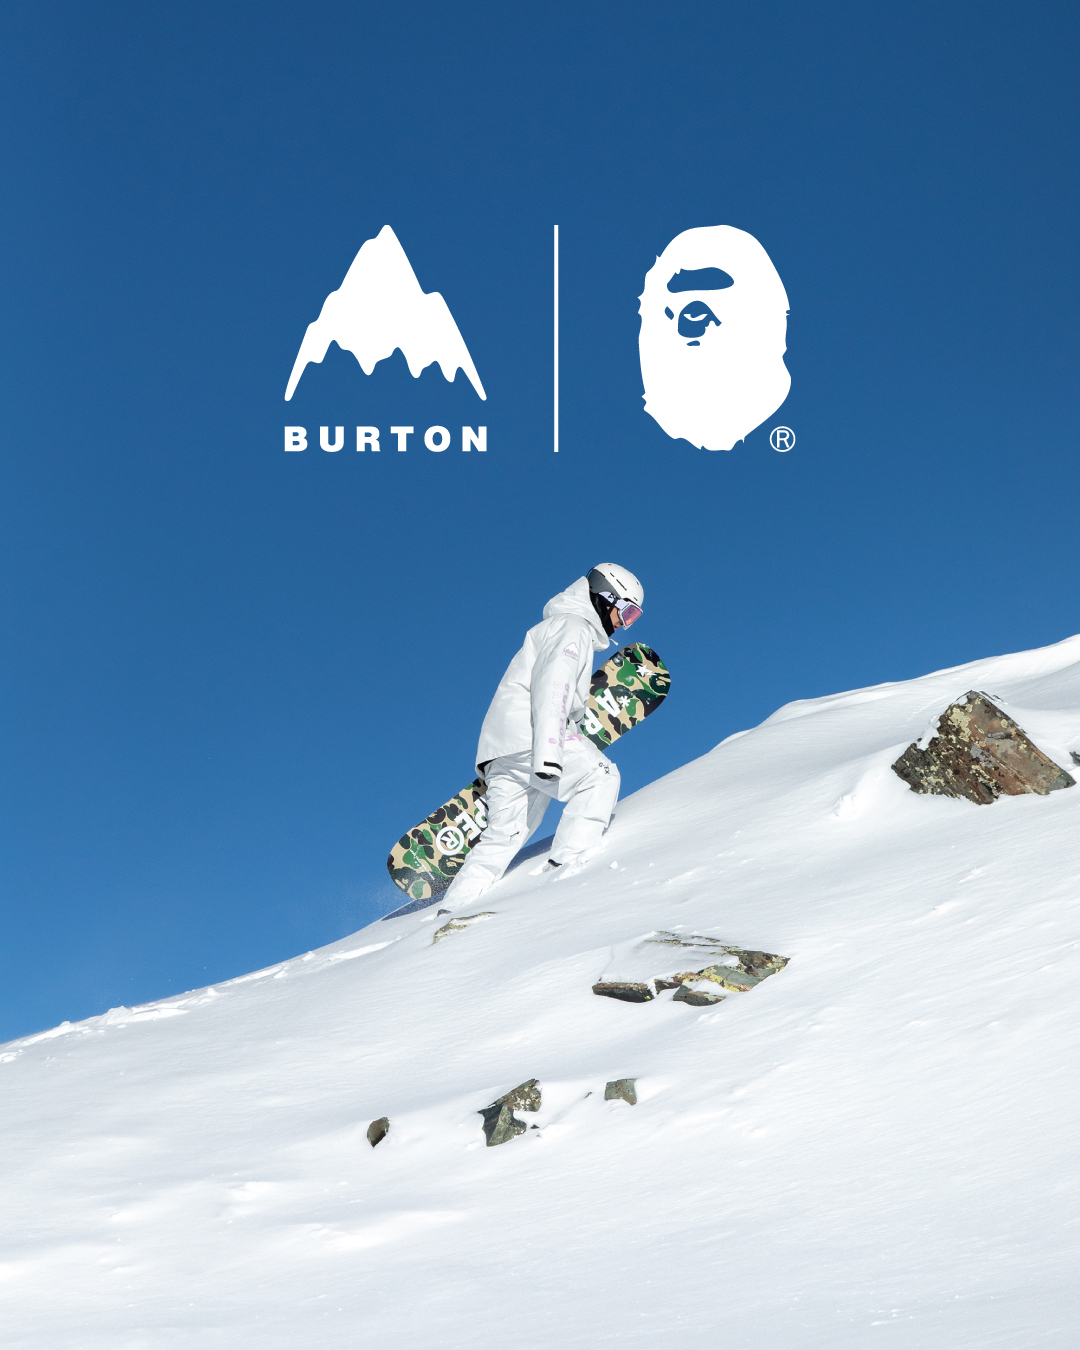 BAPE.COM on X: "BAPE® and Burton have come together to create a  collaboration that transcends boundaries, and of course actual geographic  boundaries. @BURTON #BAPE #BURTON #BAPExBURTON https://t.co/x2gaIHCAJi" / X